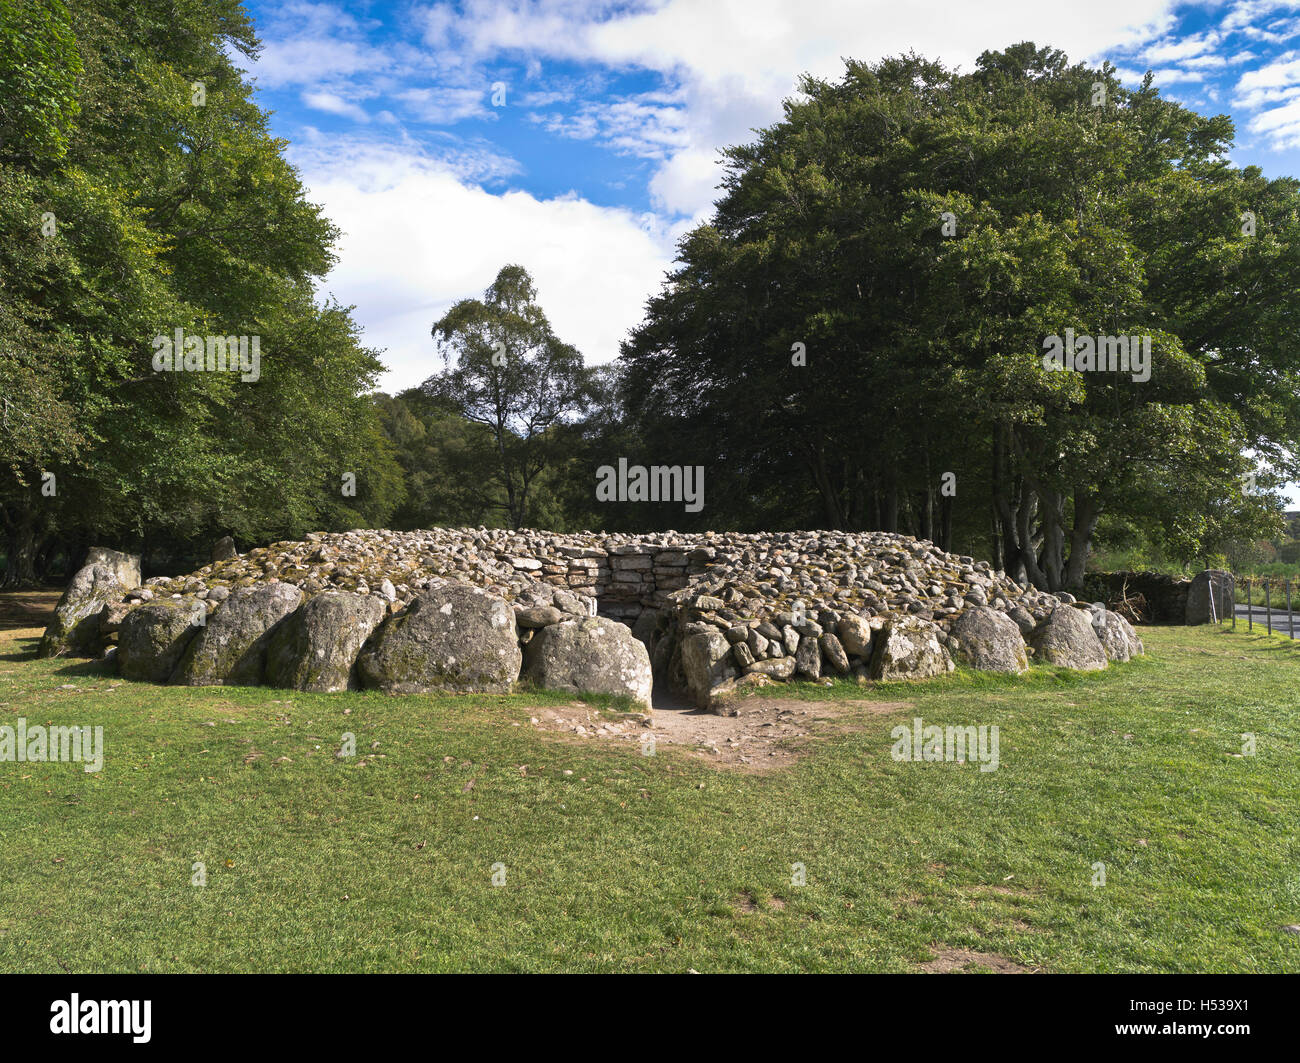 dh Balnuaran of Clava CULLODEN MOOR INVERNESS SHIRE Clava Cairns bronze age cairn Scotland neolithic tomb burial mound site chamber Stock Photo